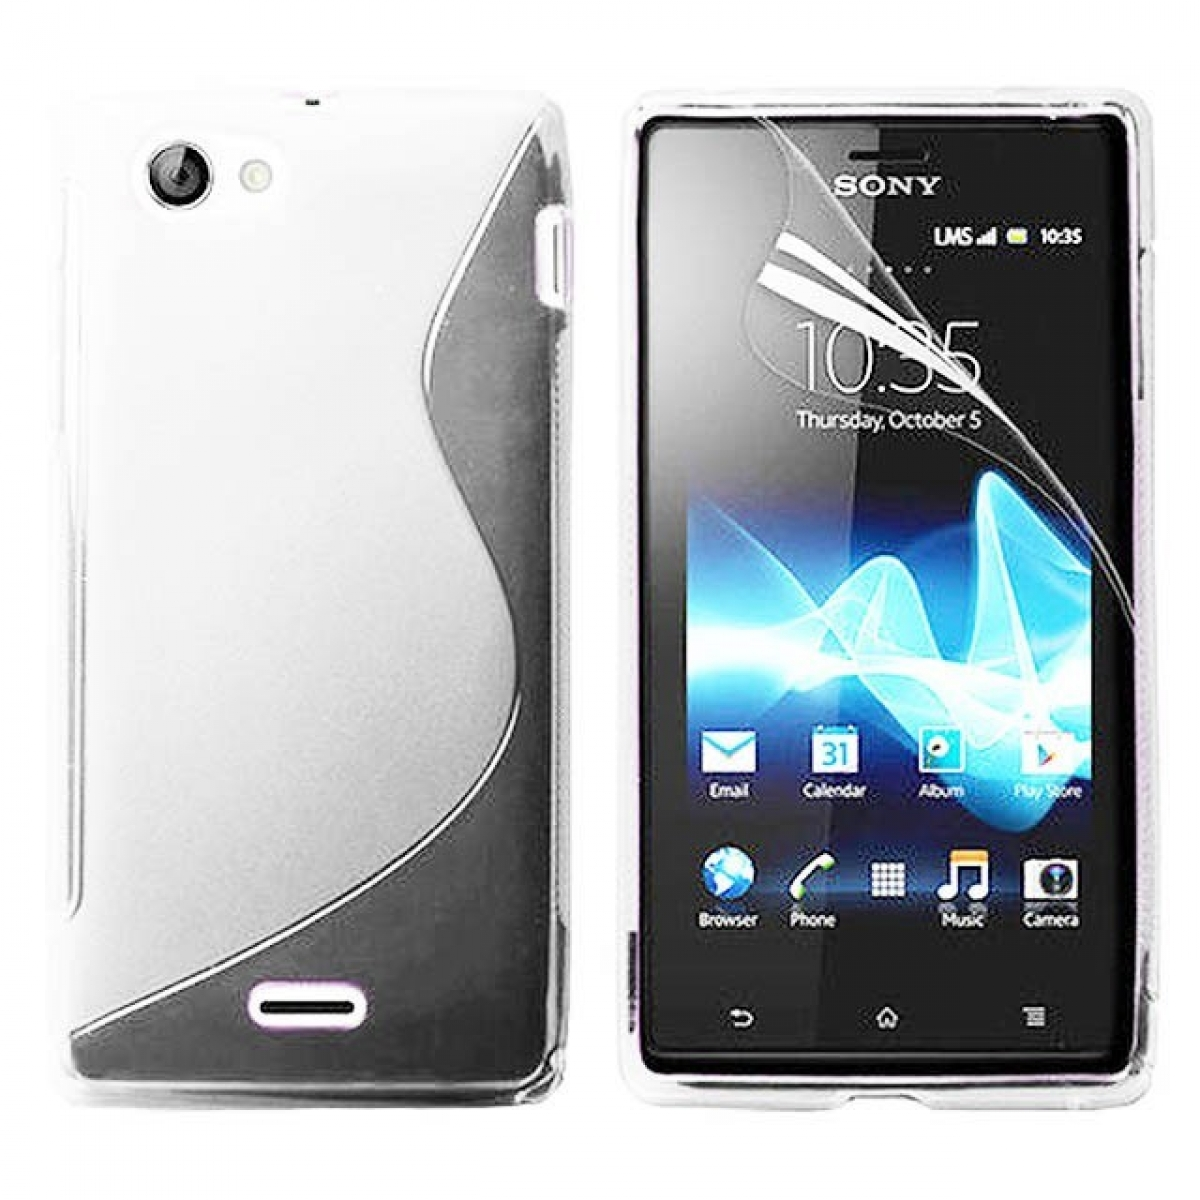 J, Transparent, Sony, Multicolor Backcover, CASEONLINE - Xperia S-Line